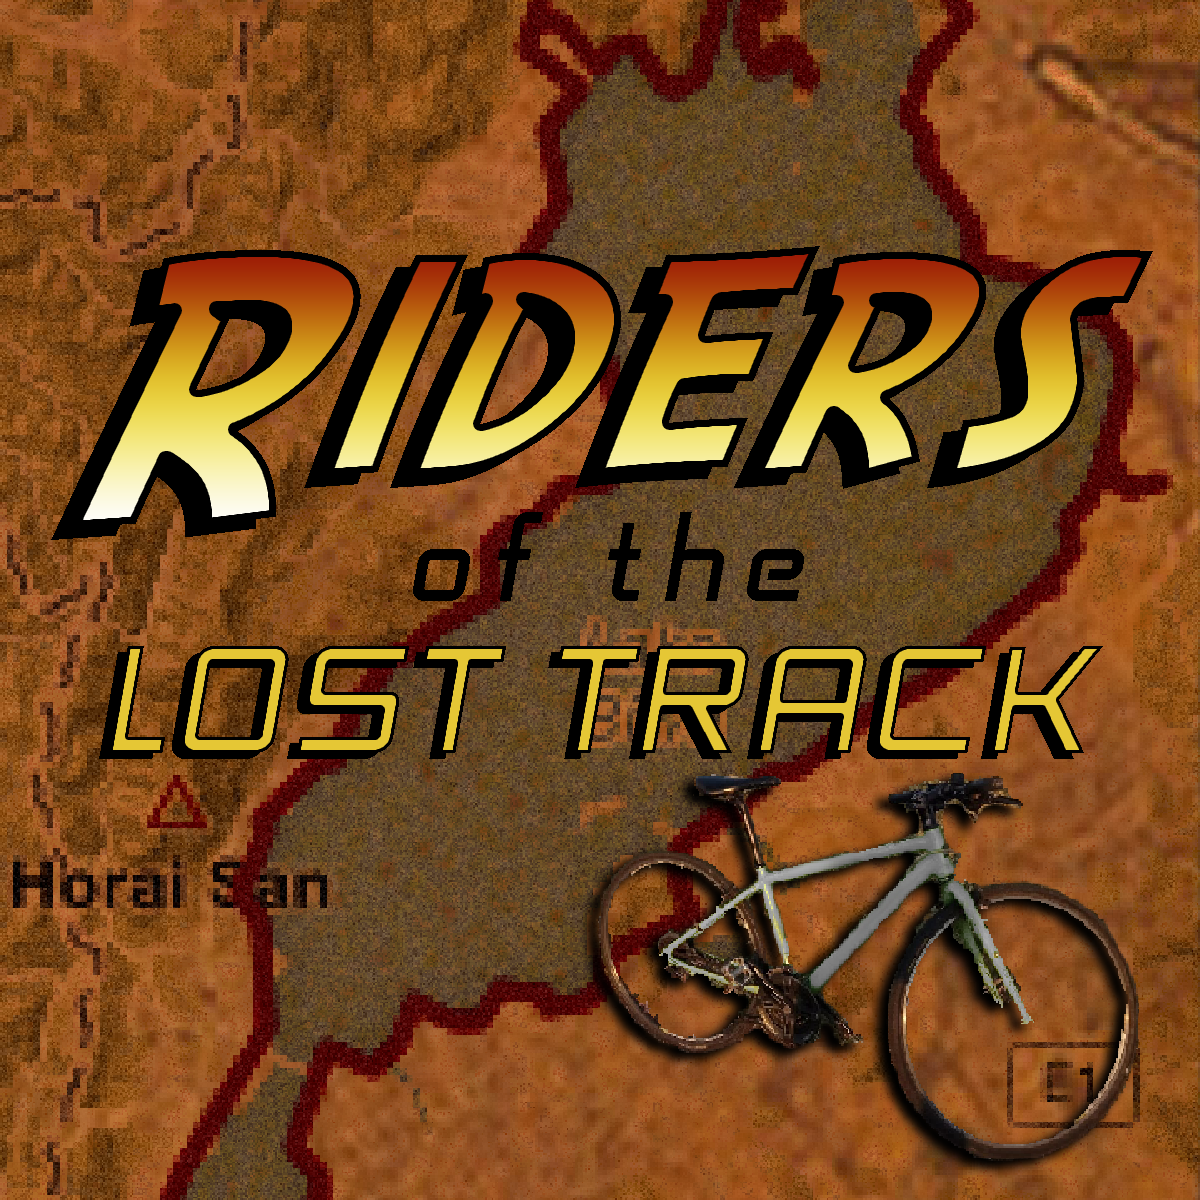 Riders of the Lost Track: Geotagged photos to GPX route